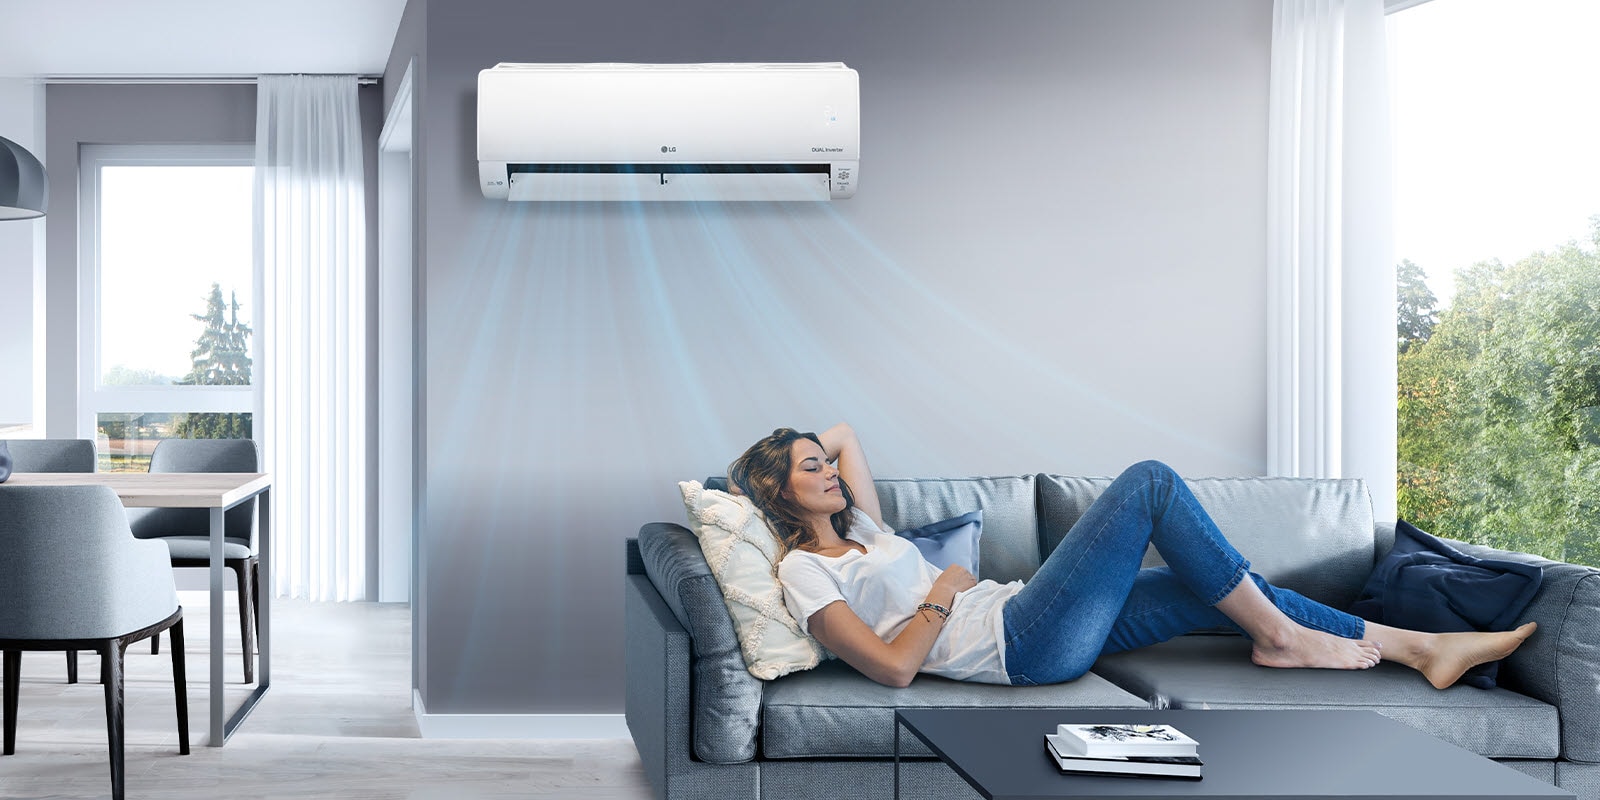 A woman relaxes on a sofa in a living room with the LG air conditioner mounted on the wall above her. The image shows blue air jets indicating that the air conditioner is on and cooling the room.